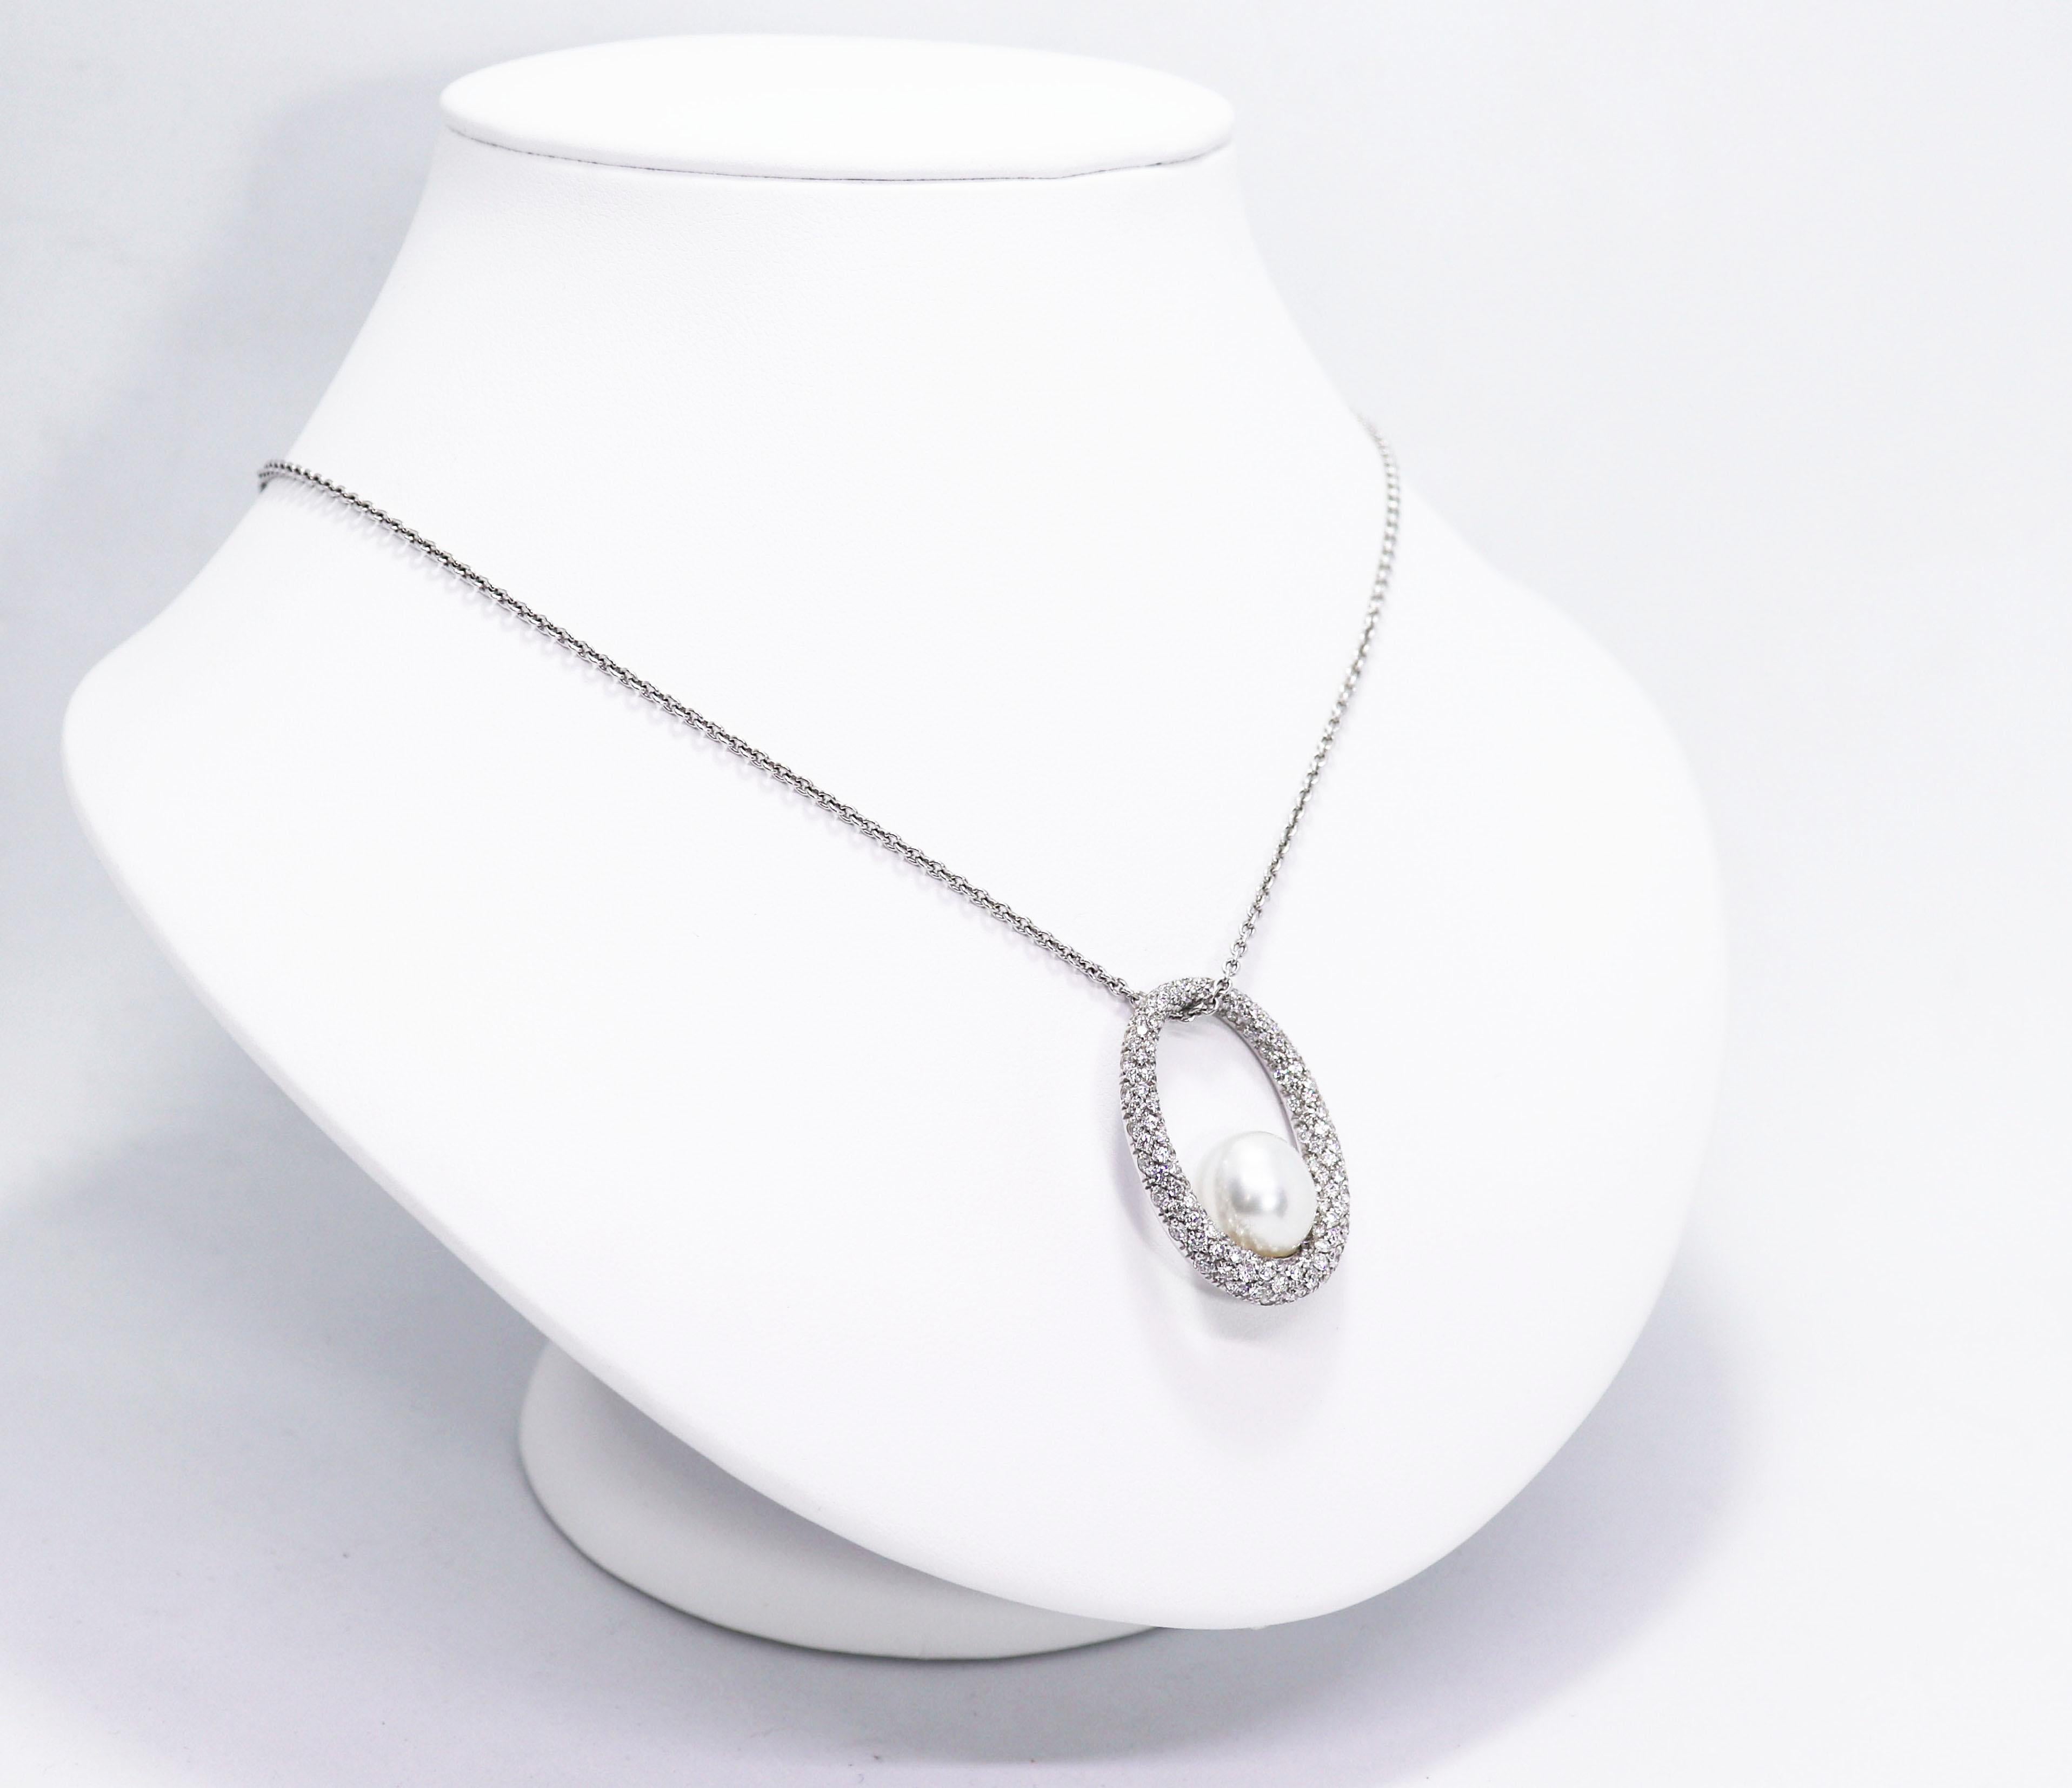 Mikimoto Pearl and Diamond Pendant with 18 Carat White Gold Chain 1